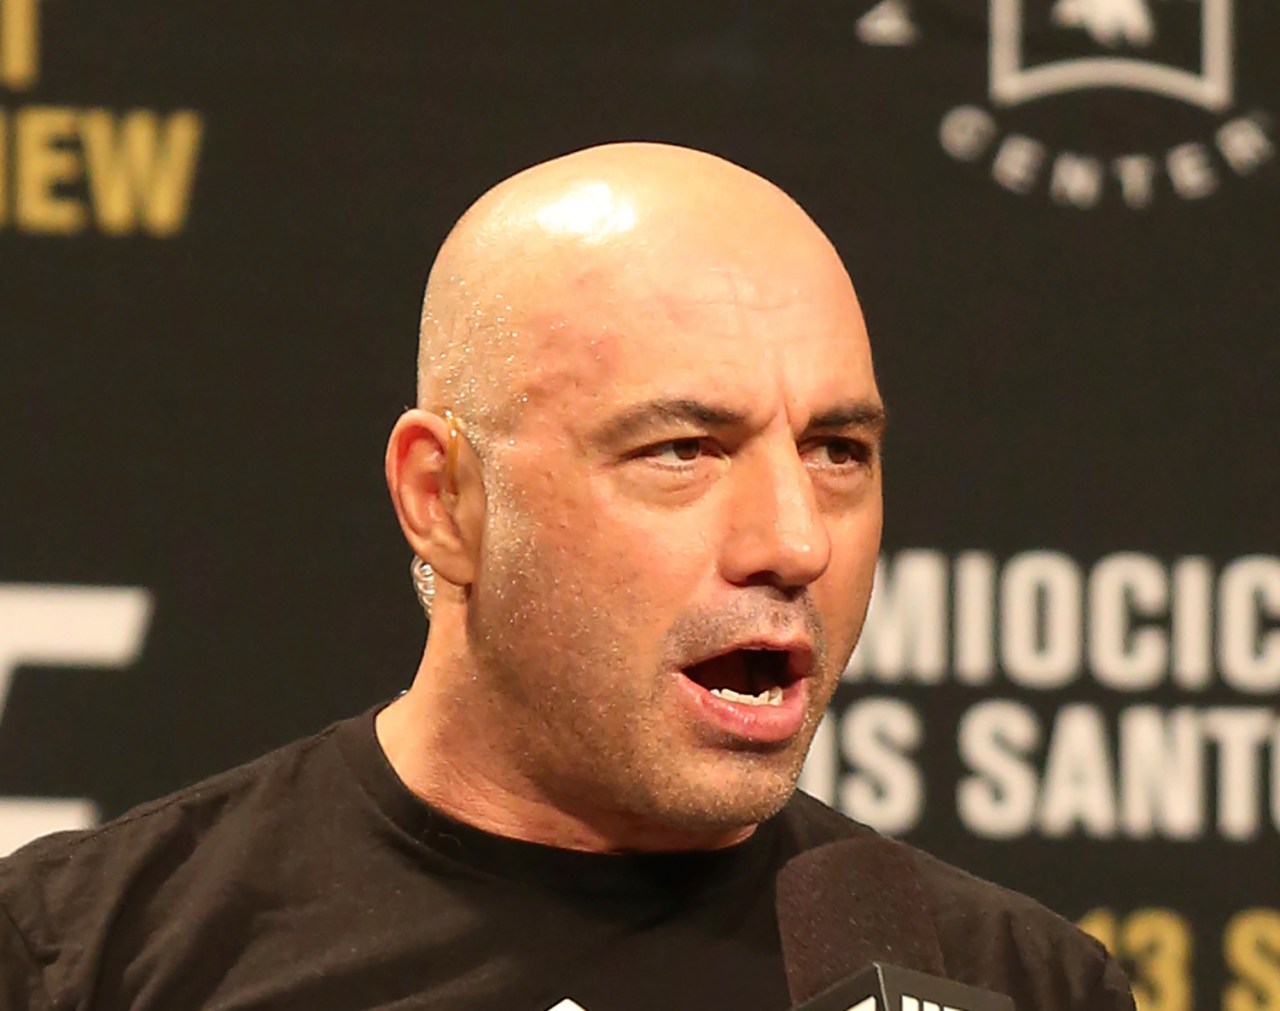 Controversial podcast host Joe Rogan signs a new deal with Spotify for up to a reported $250 million